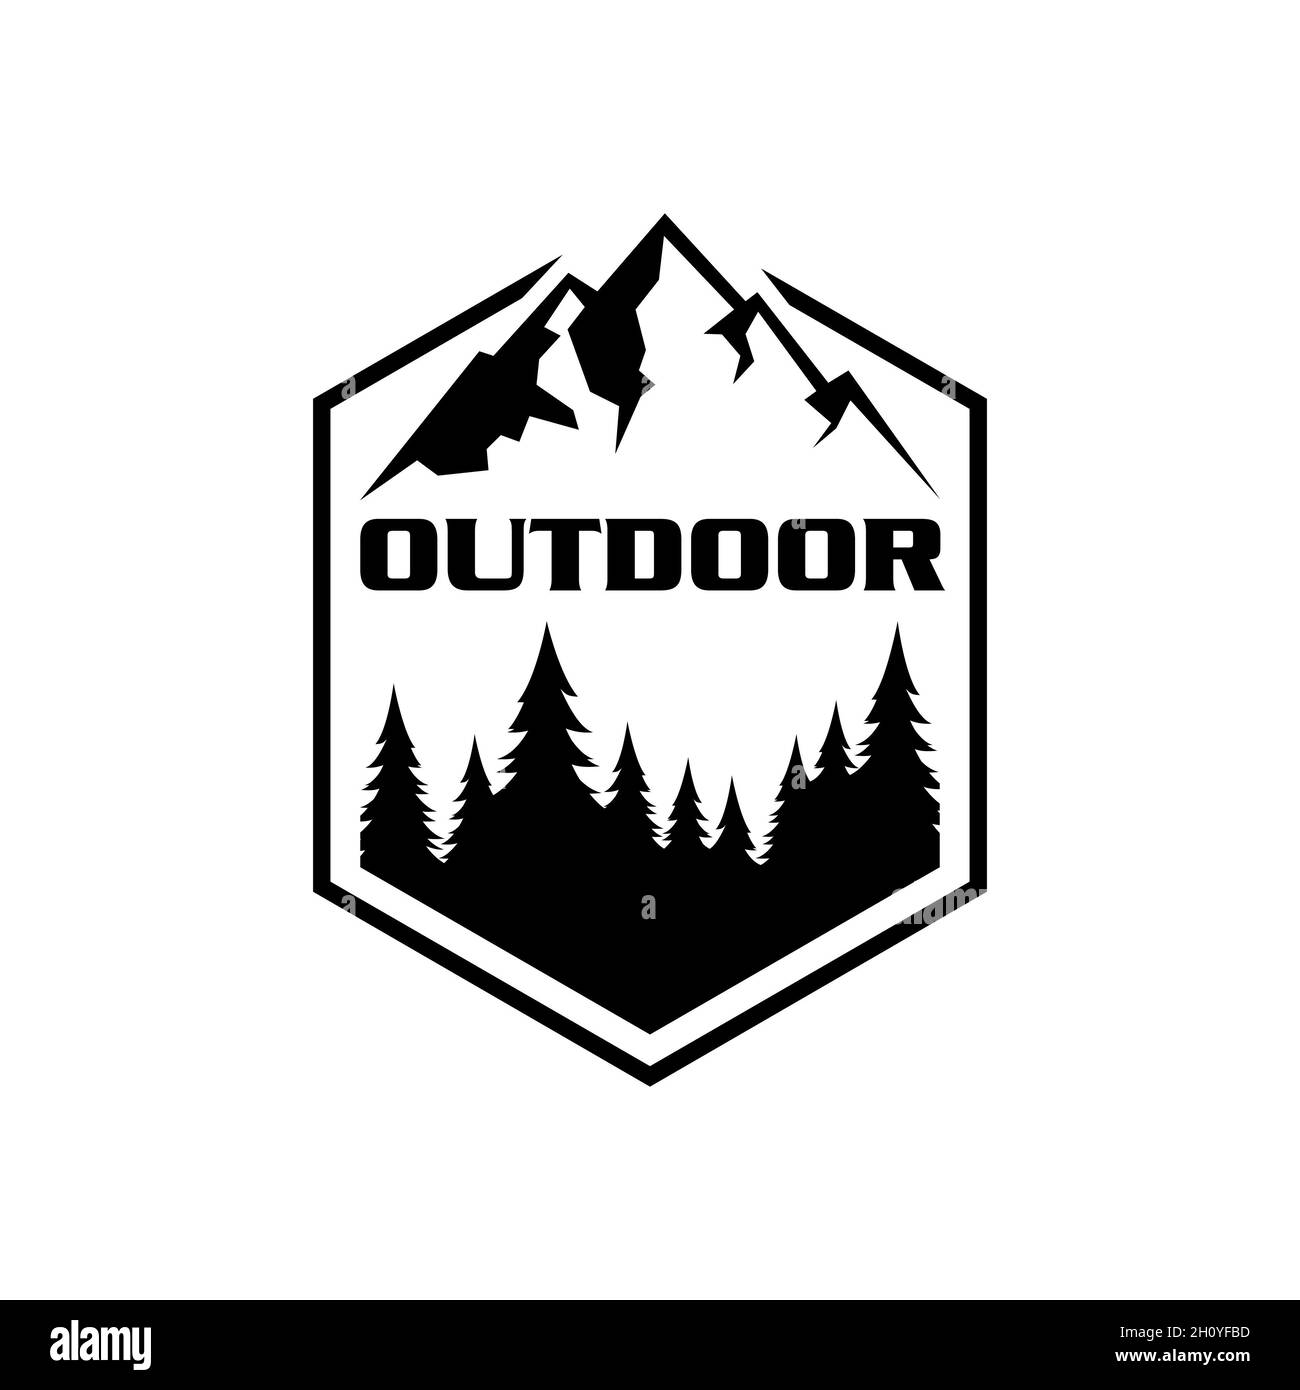 mountain and pine tree badge, Logo design related to outdoor activity Stock Photo